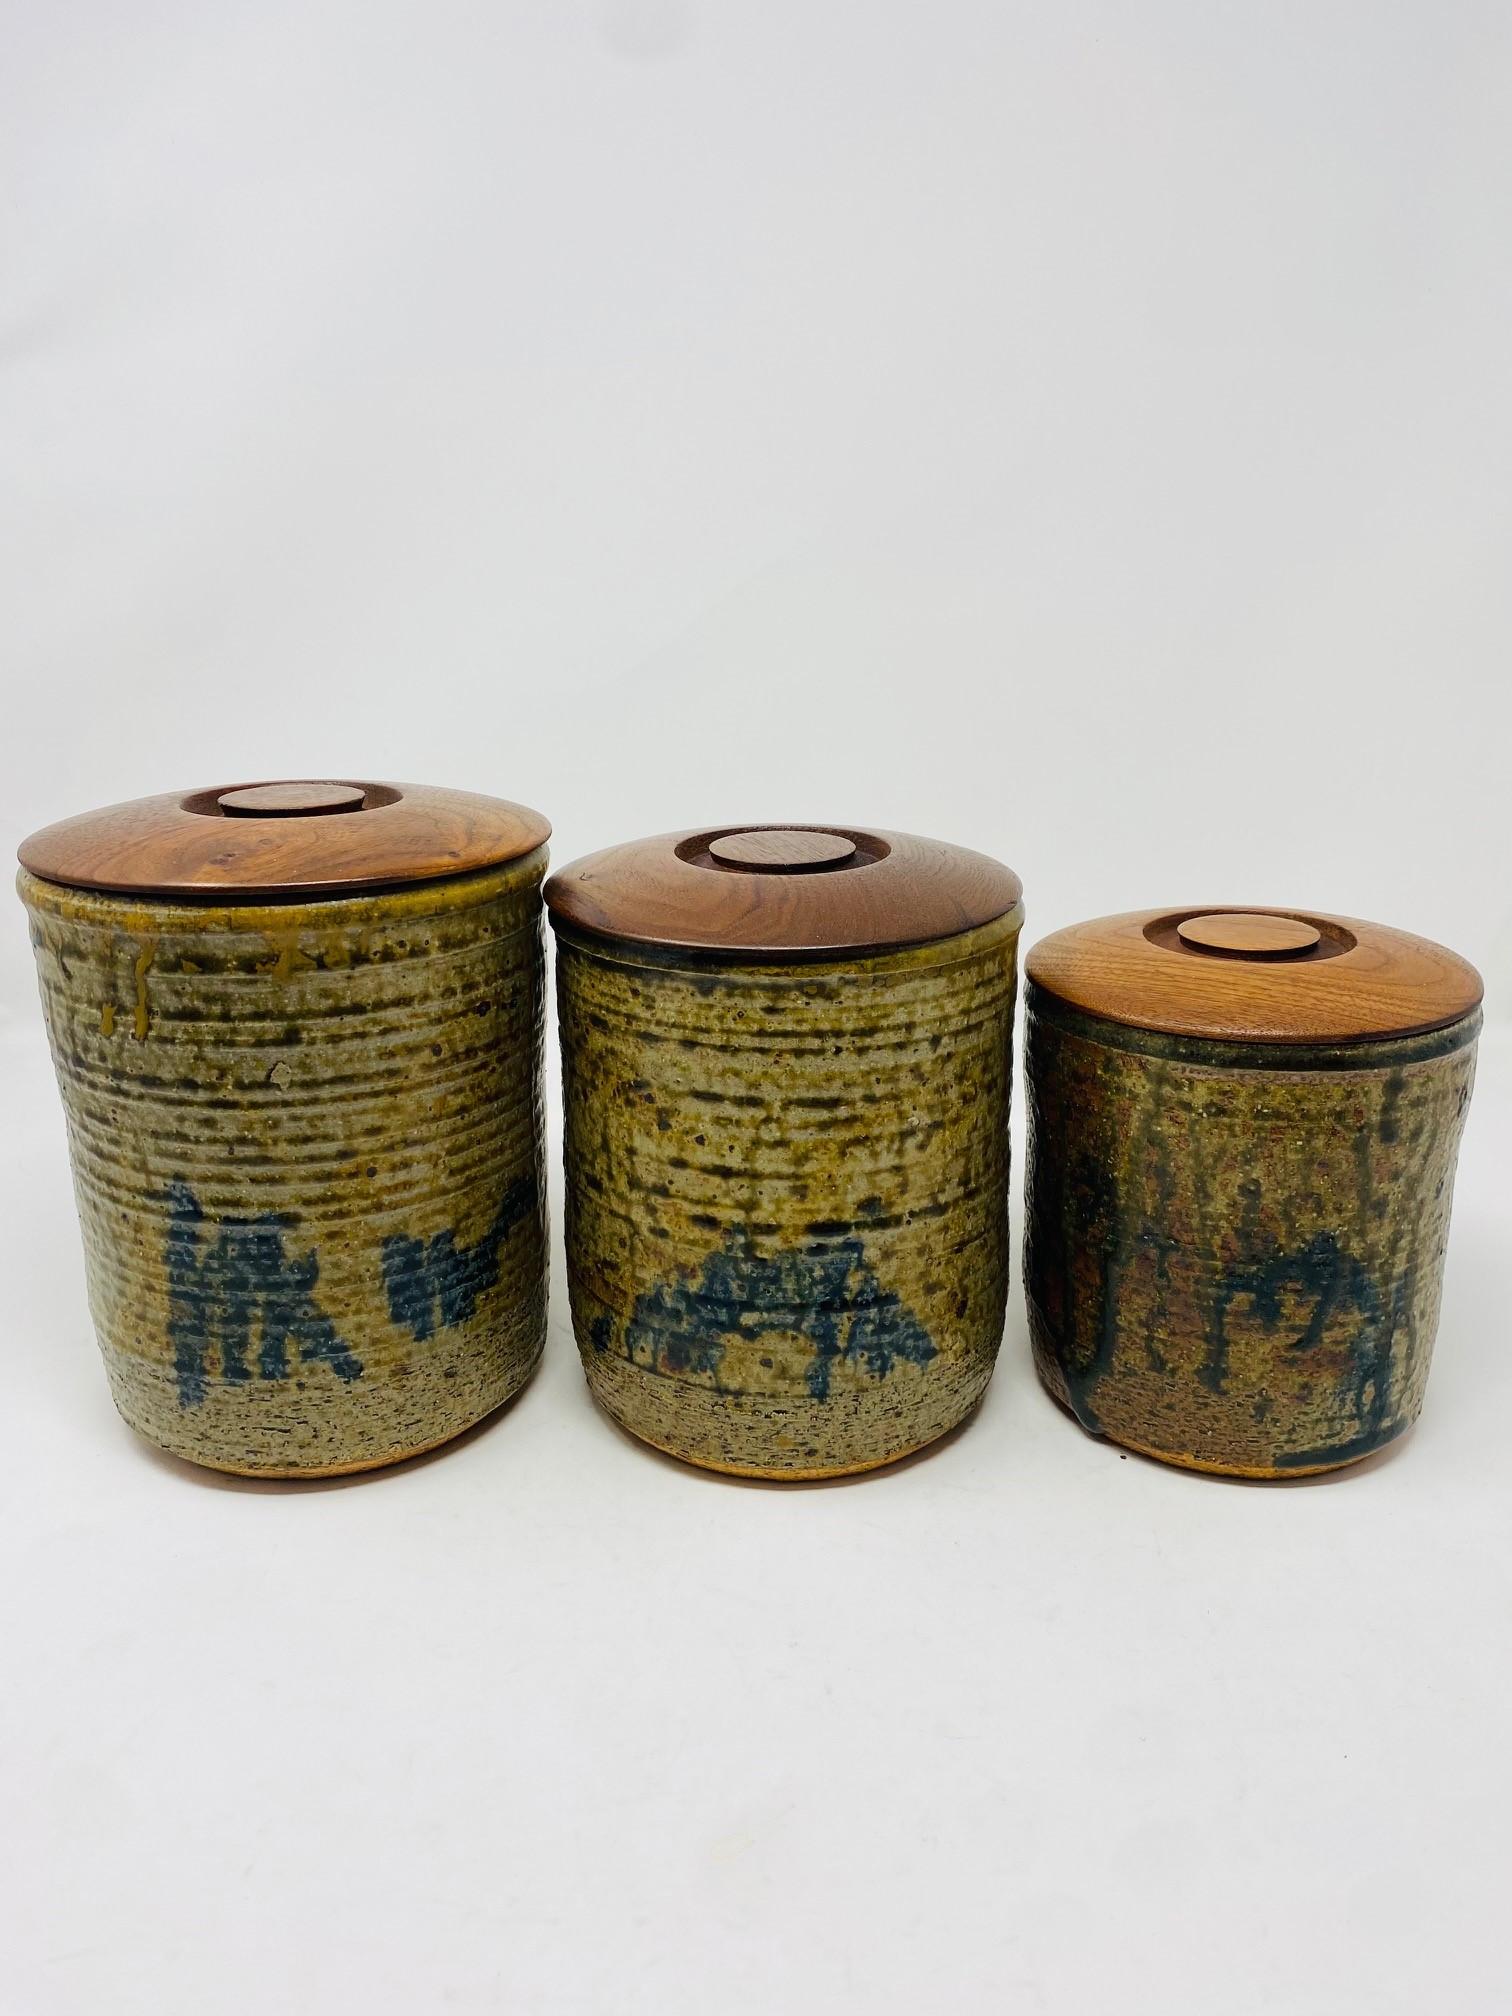 Beautifully crafted set of 3 original ceramic canisters that present craftsmanship and style.  This set includes canisters in 3 different sizes.  Each is presented with its own walnut lid with a circular design that aesthetically creates a timeless